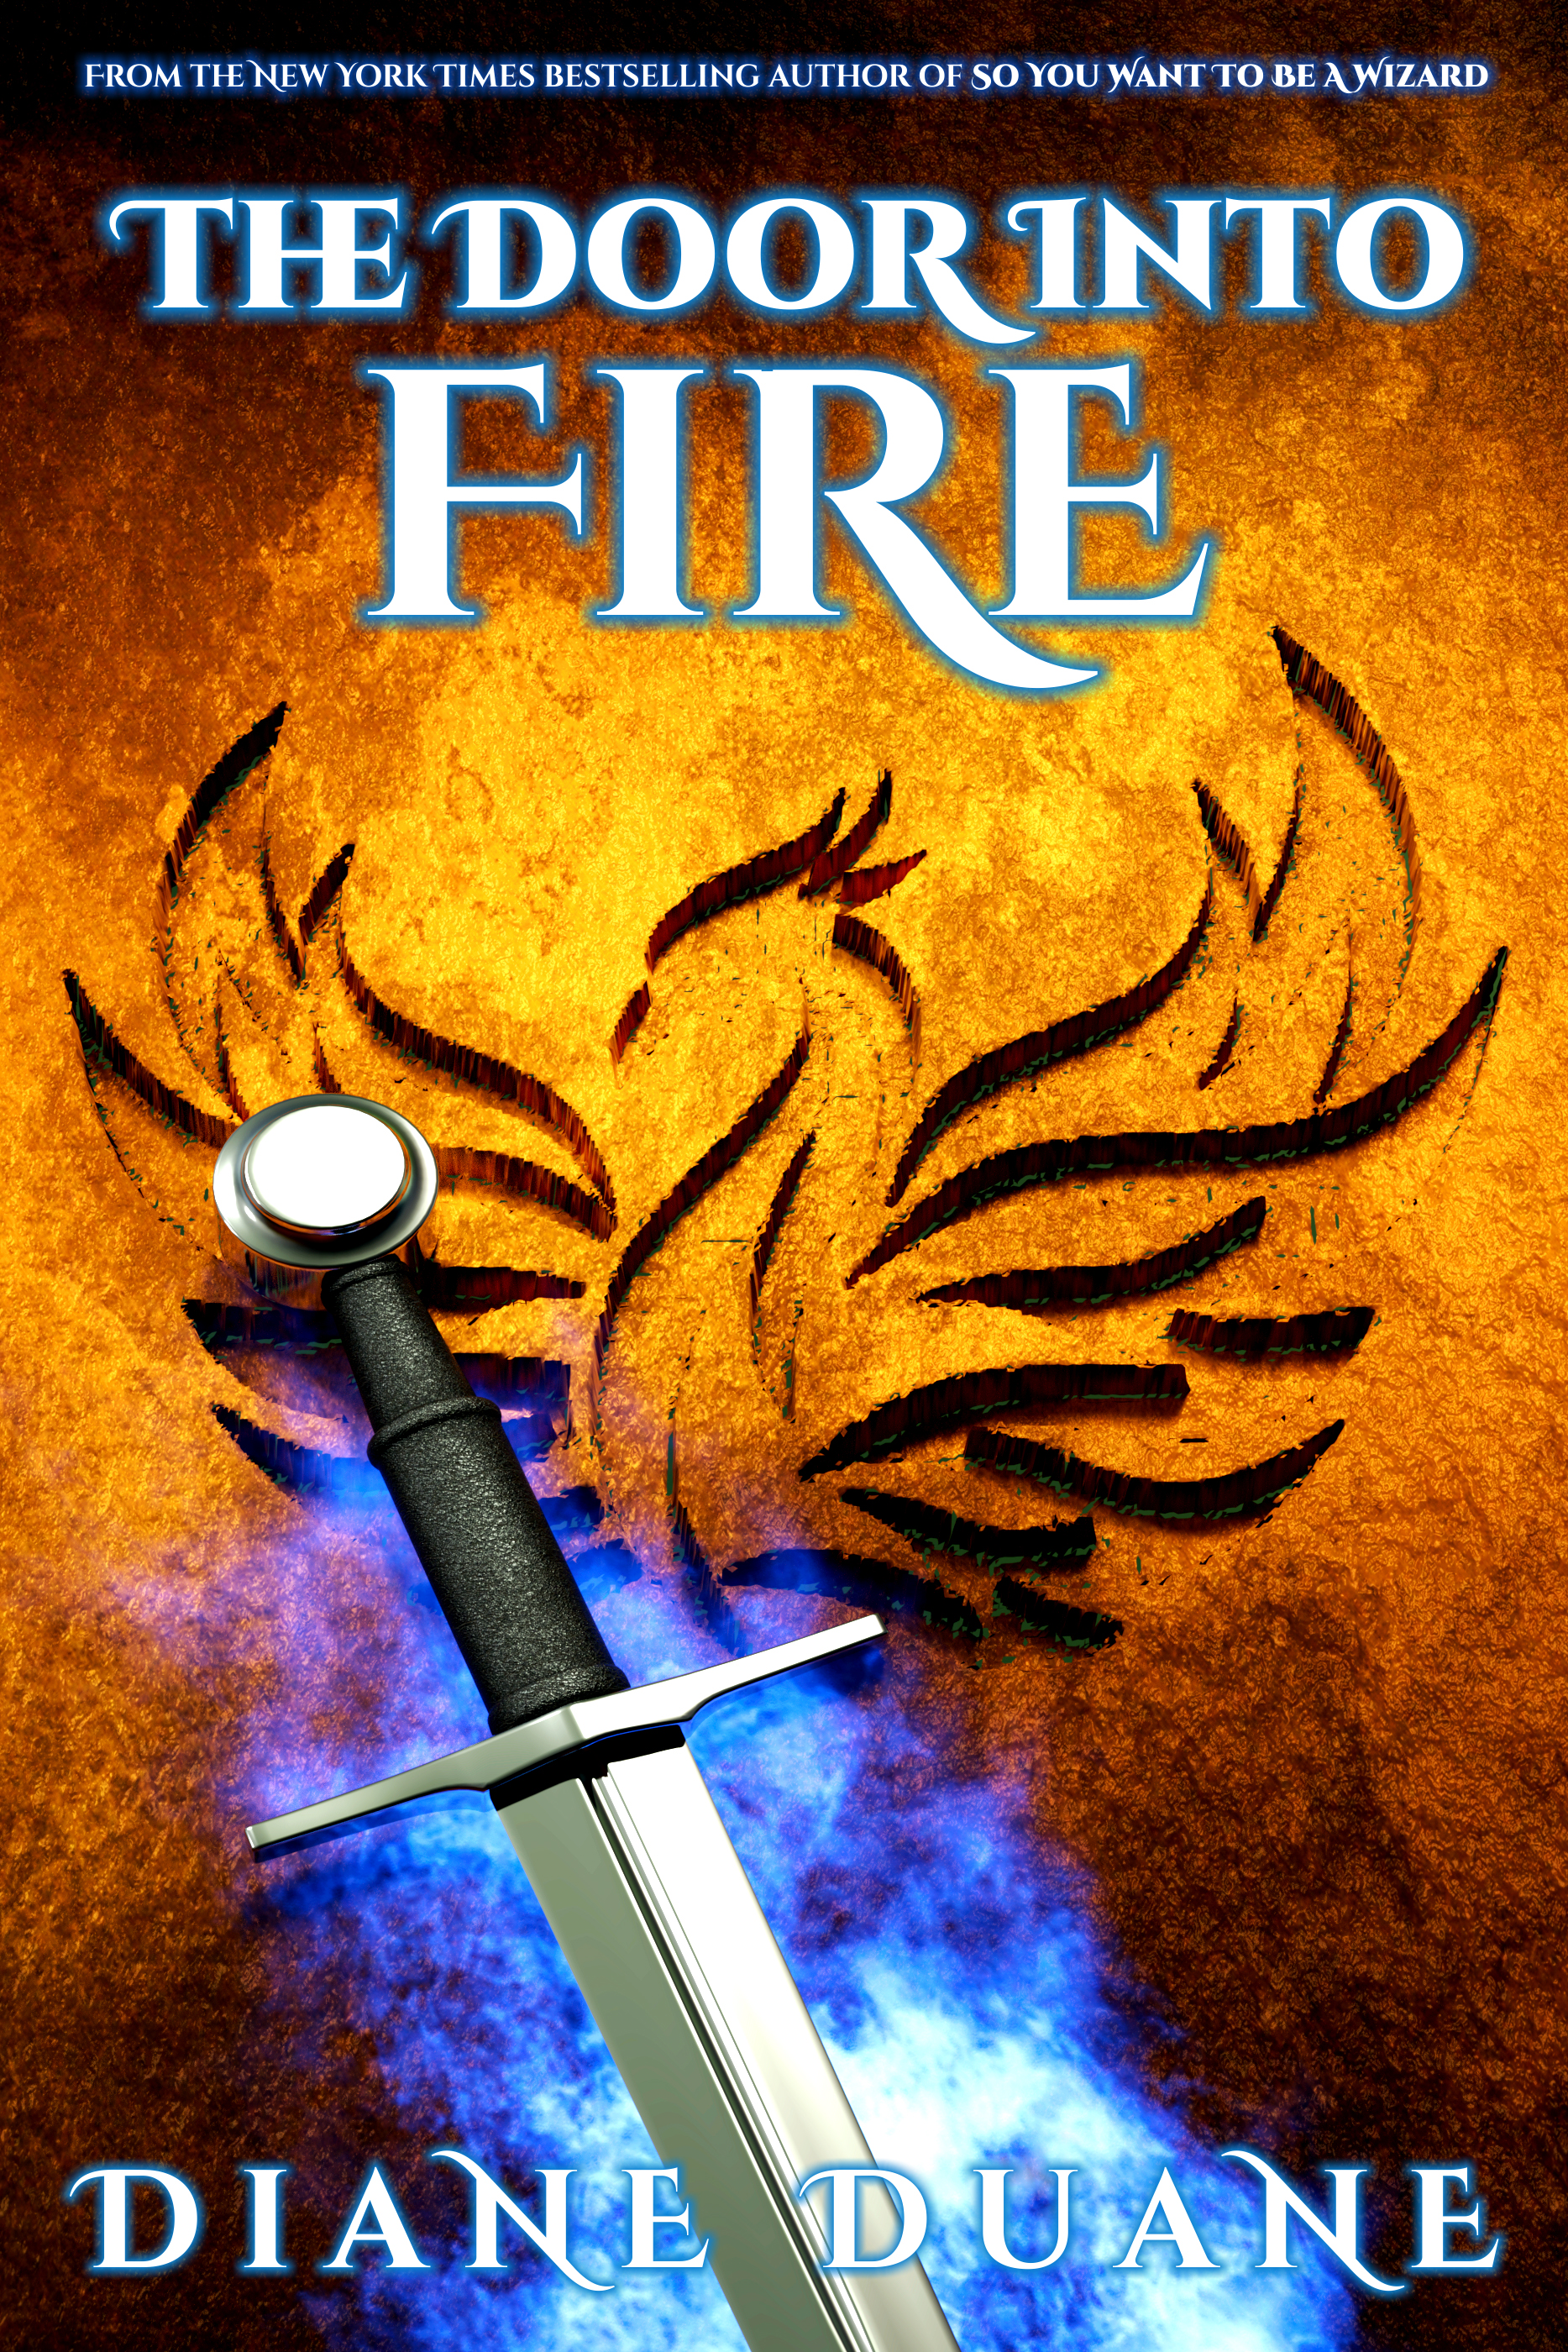 Buy THE DOOR INTO FIRE from the author at Ebooks Direct